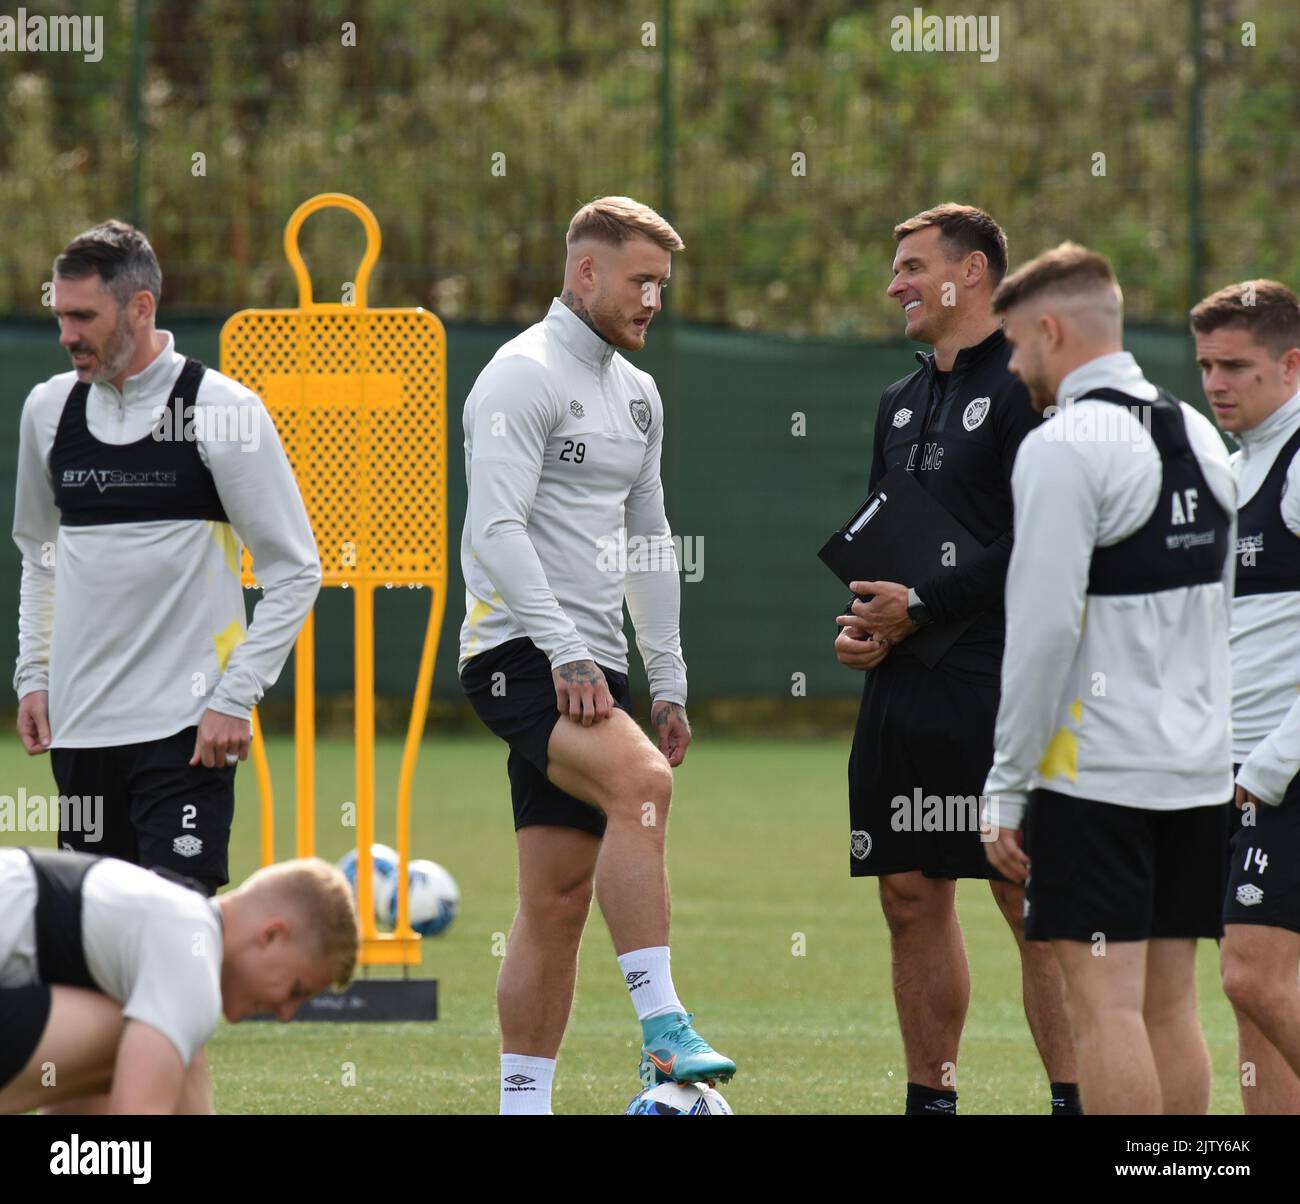 Oriam Sports Centre Edinburgh.Scotland UK.2nd.Sept 22 Hearts new signing Stephen Humphrys chats with coach Lee McCulloch during training session for Cinch Premiership match vs Livingston Credit: eric mccowat/Alamy Live News Stock Photo